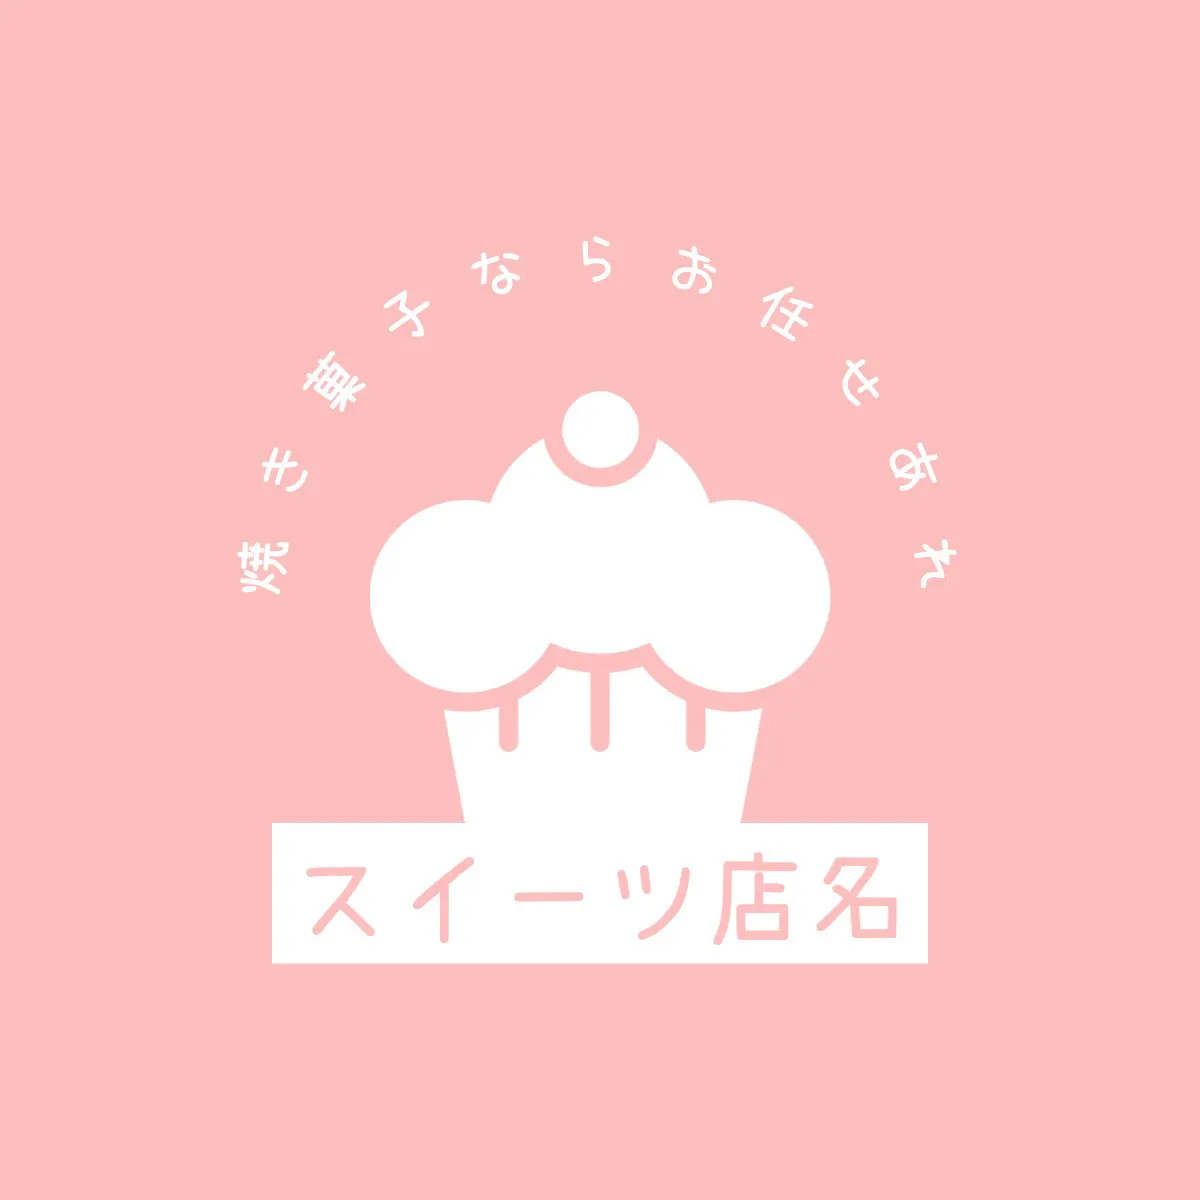 sweets store logo